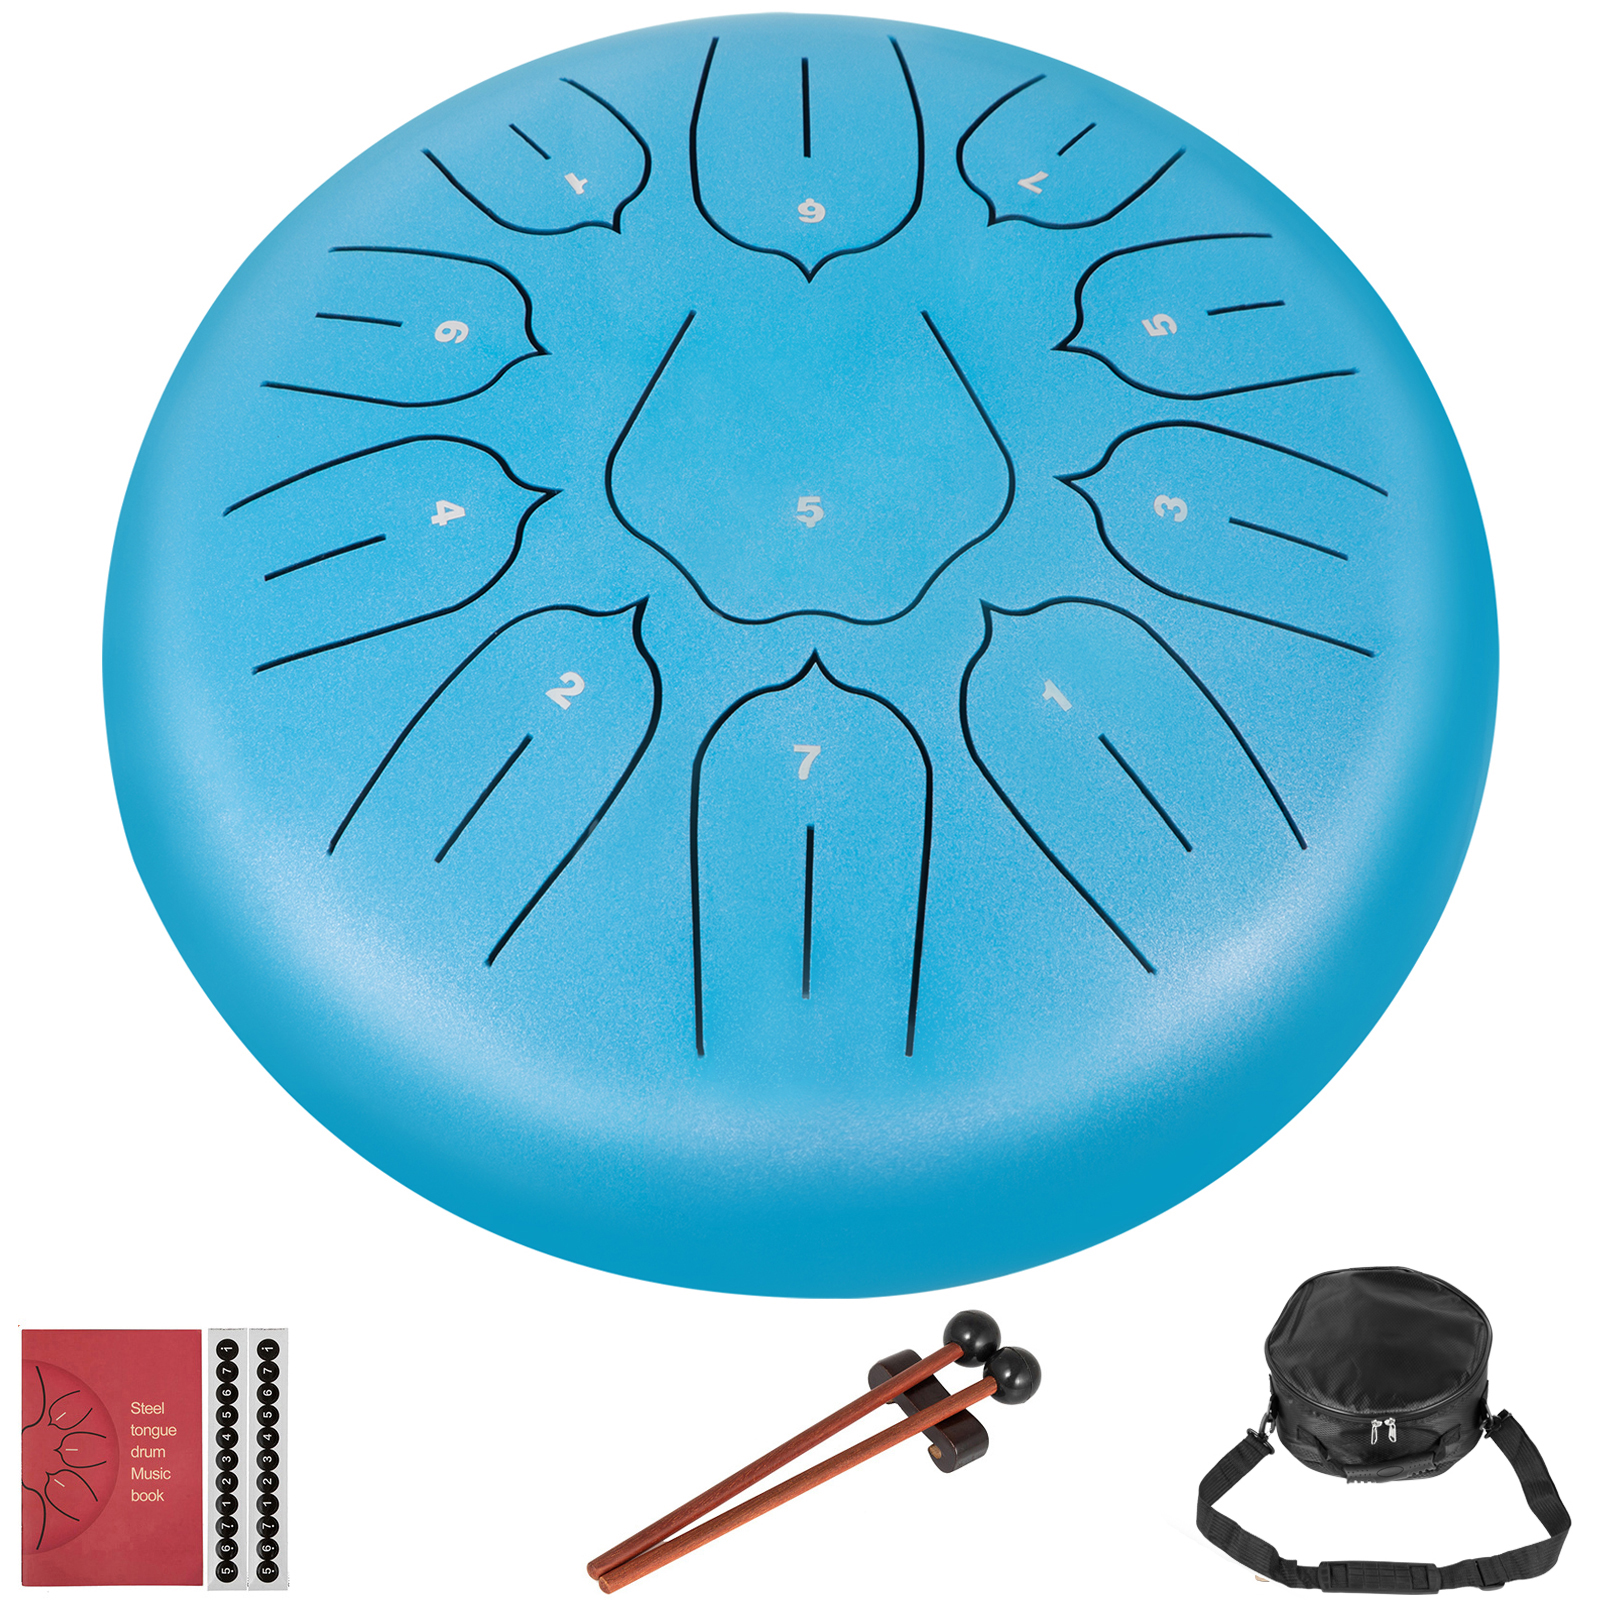 10 Inch Steel Tongue Drum Handpan D Major 11 Notes Hand Tankdrum W/ Bag Mallets от Vevor Many GEOs